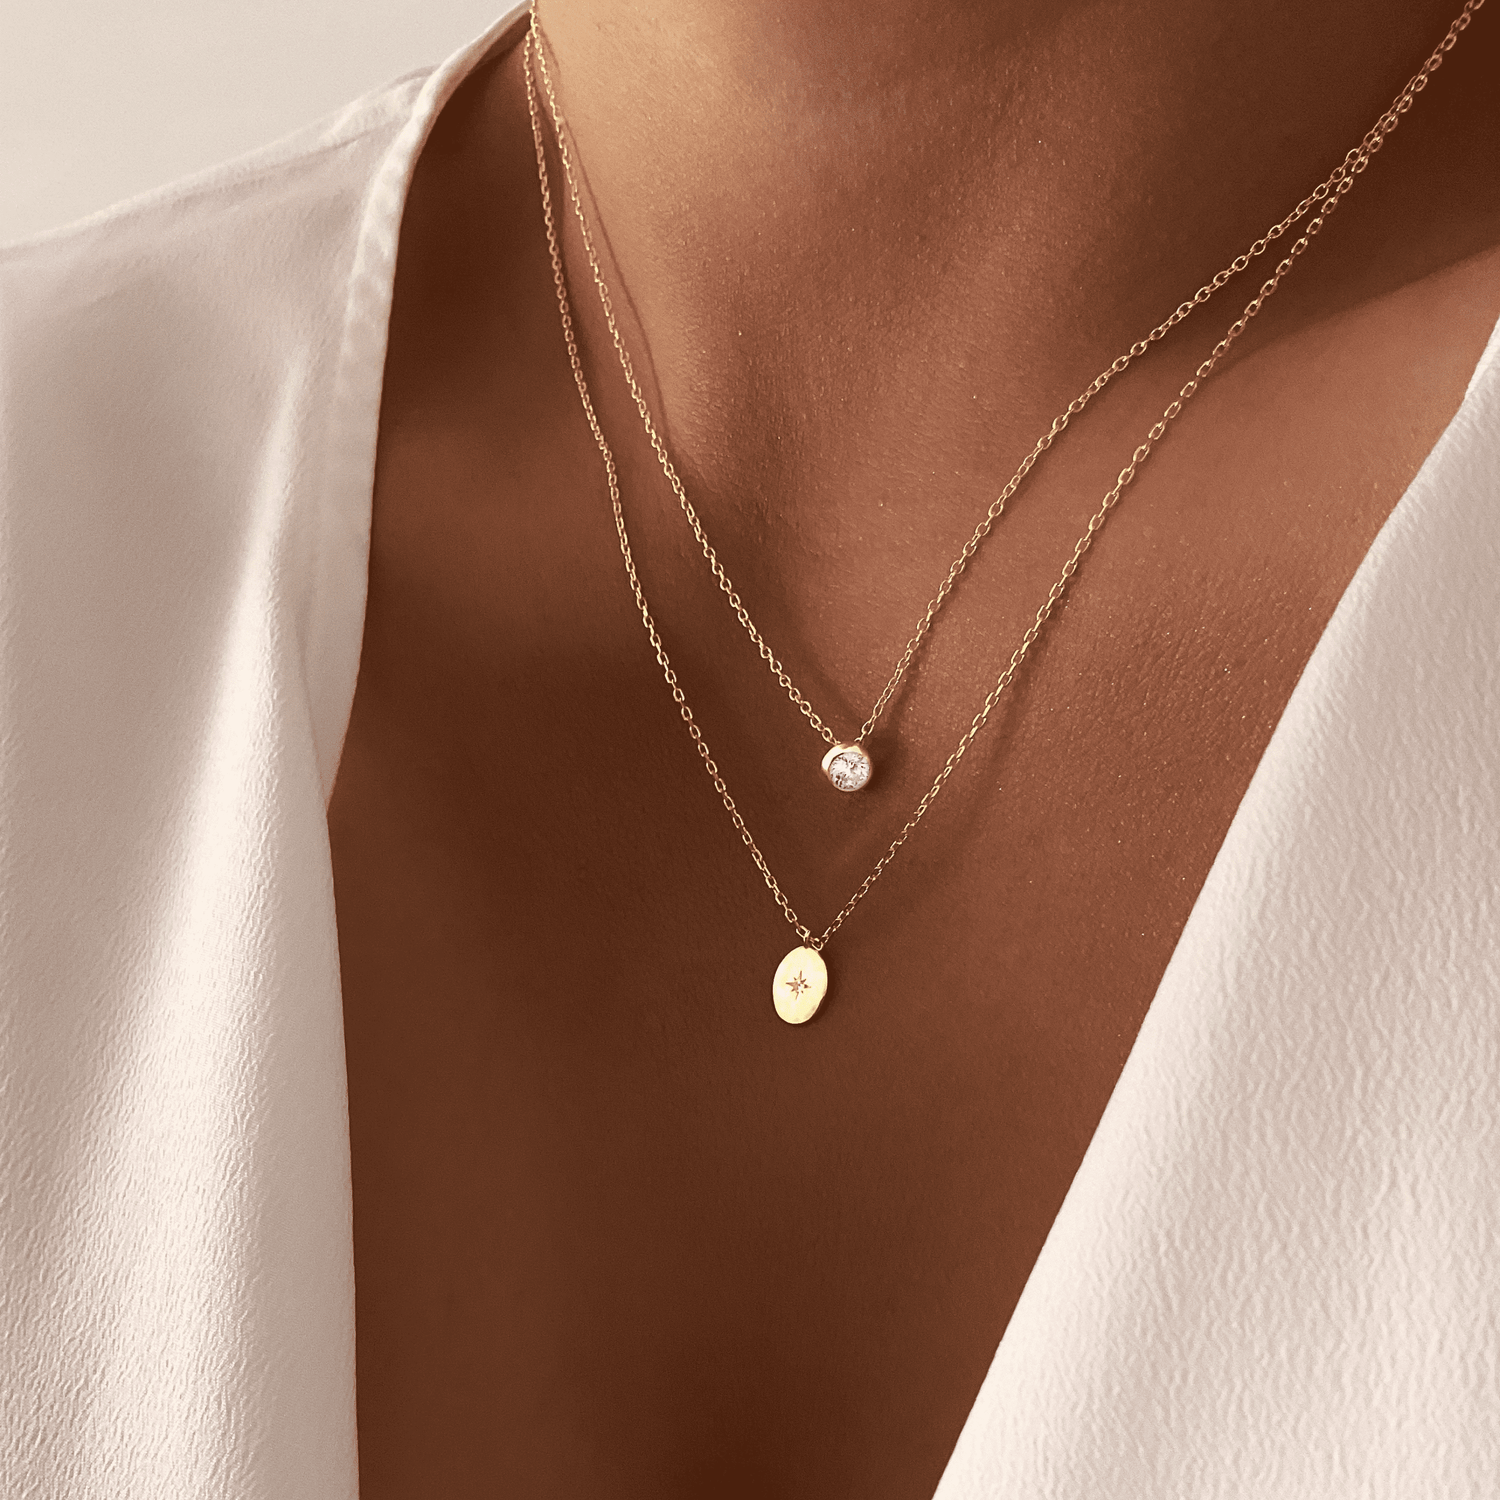 bezel solitaire diamond necklace womens jewellery, womens trendy fashion jewellery, necklace stack, necklace layering , gold and silver 